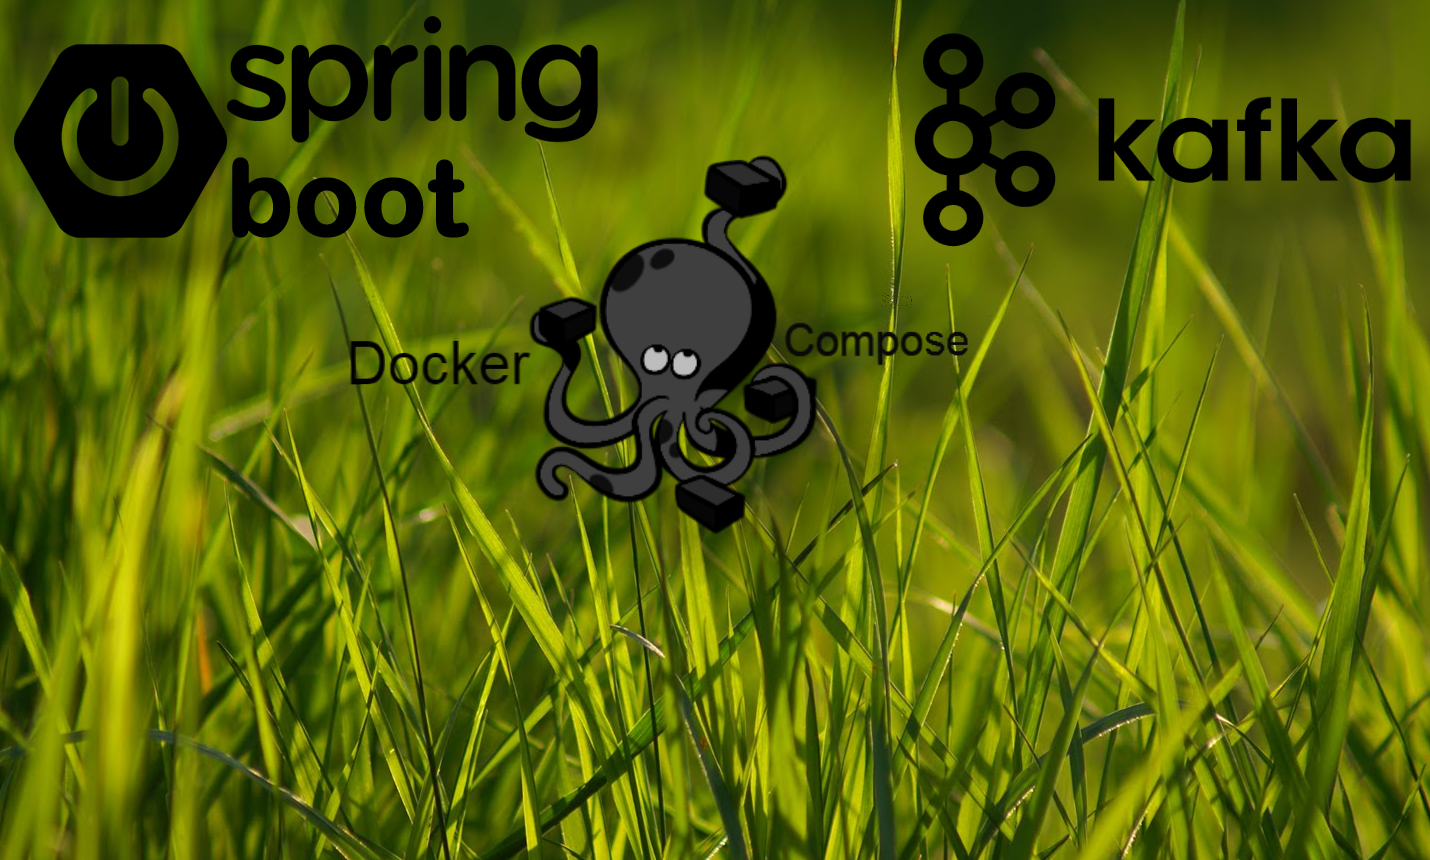 How to use Spring boot and Kafka to build a project based on microservices architecture